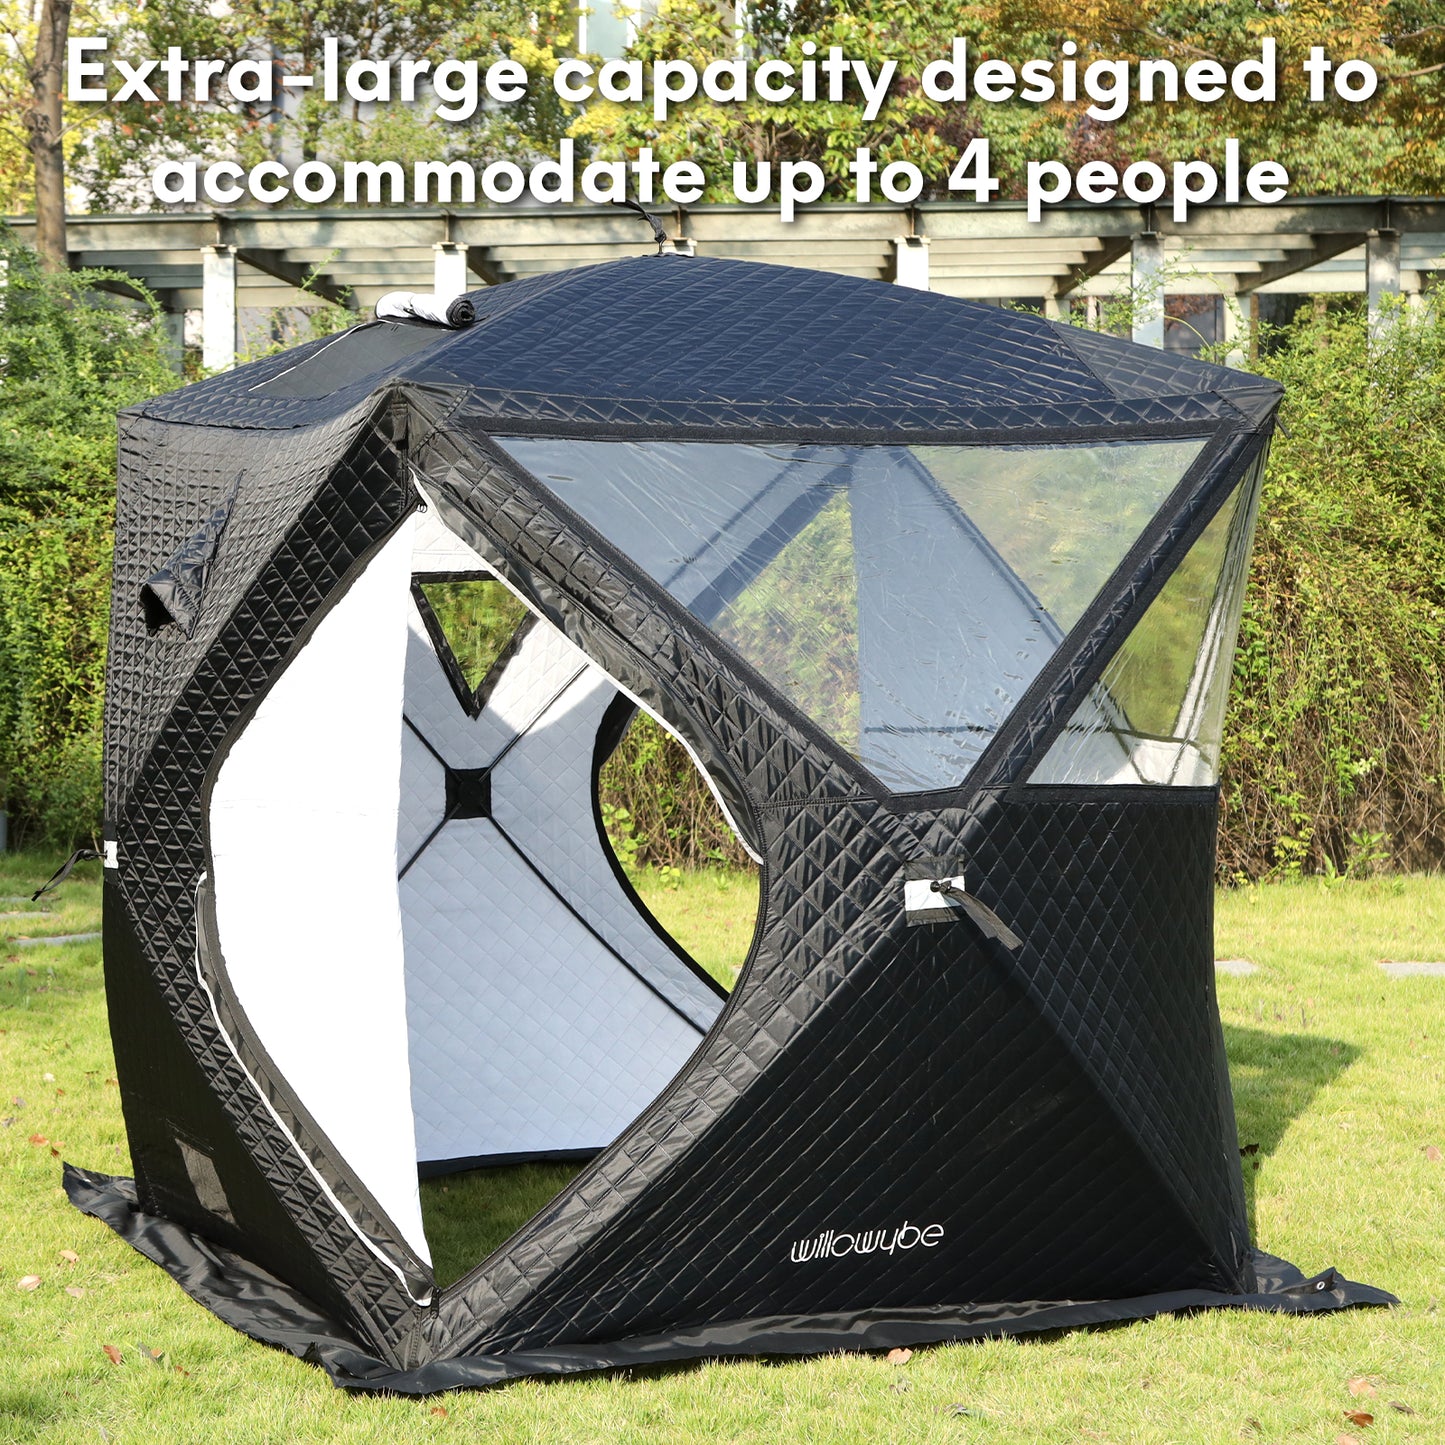 Outdoor Sauna Tent Pro - 4-Person, All-Weather, Insulated, Solid, Panoramic View, Easy Setup - Willowybe